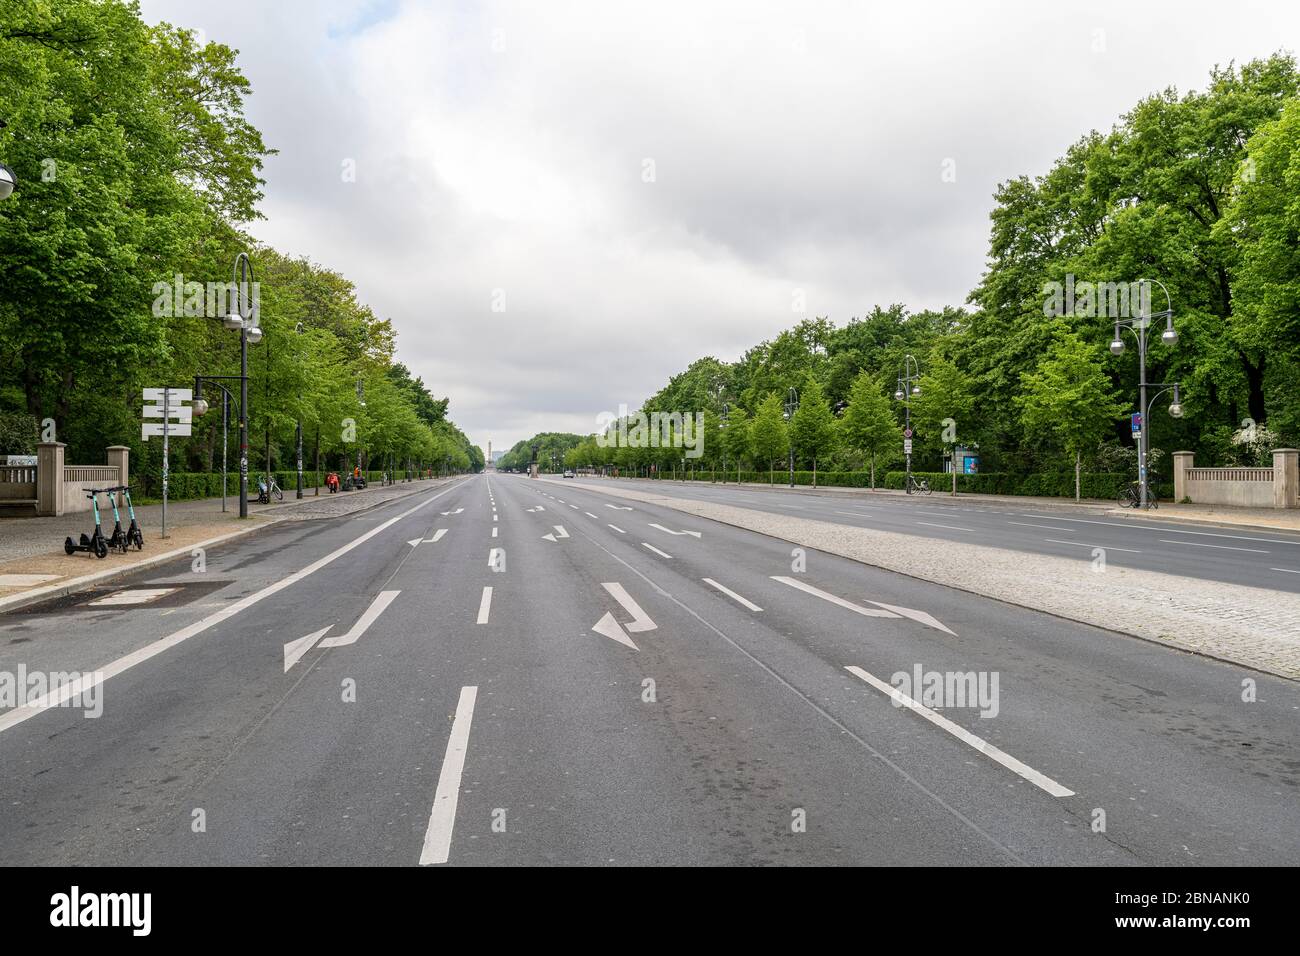 Looking west along the prominent street known as Straße des 17. Juni (17th of June Street in English) in central Berlin, Germany Stock Photo